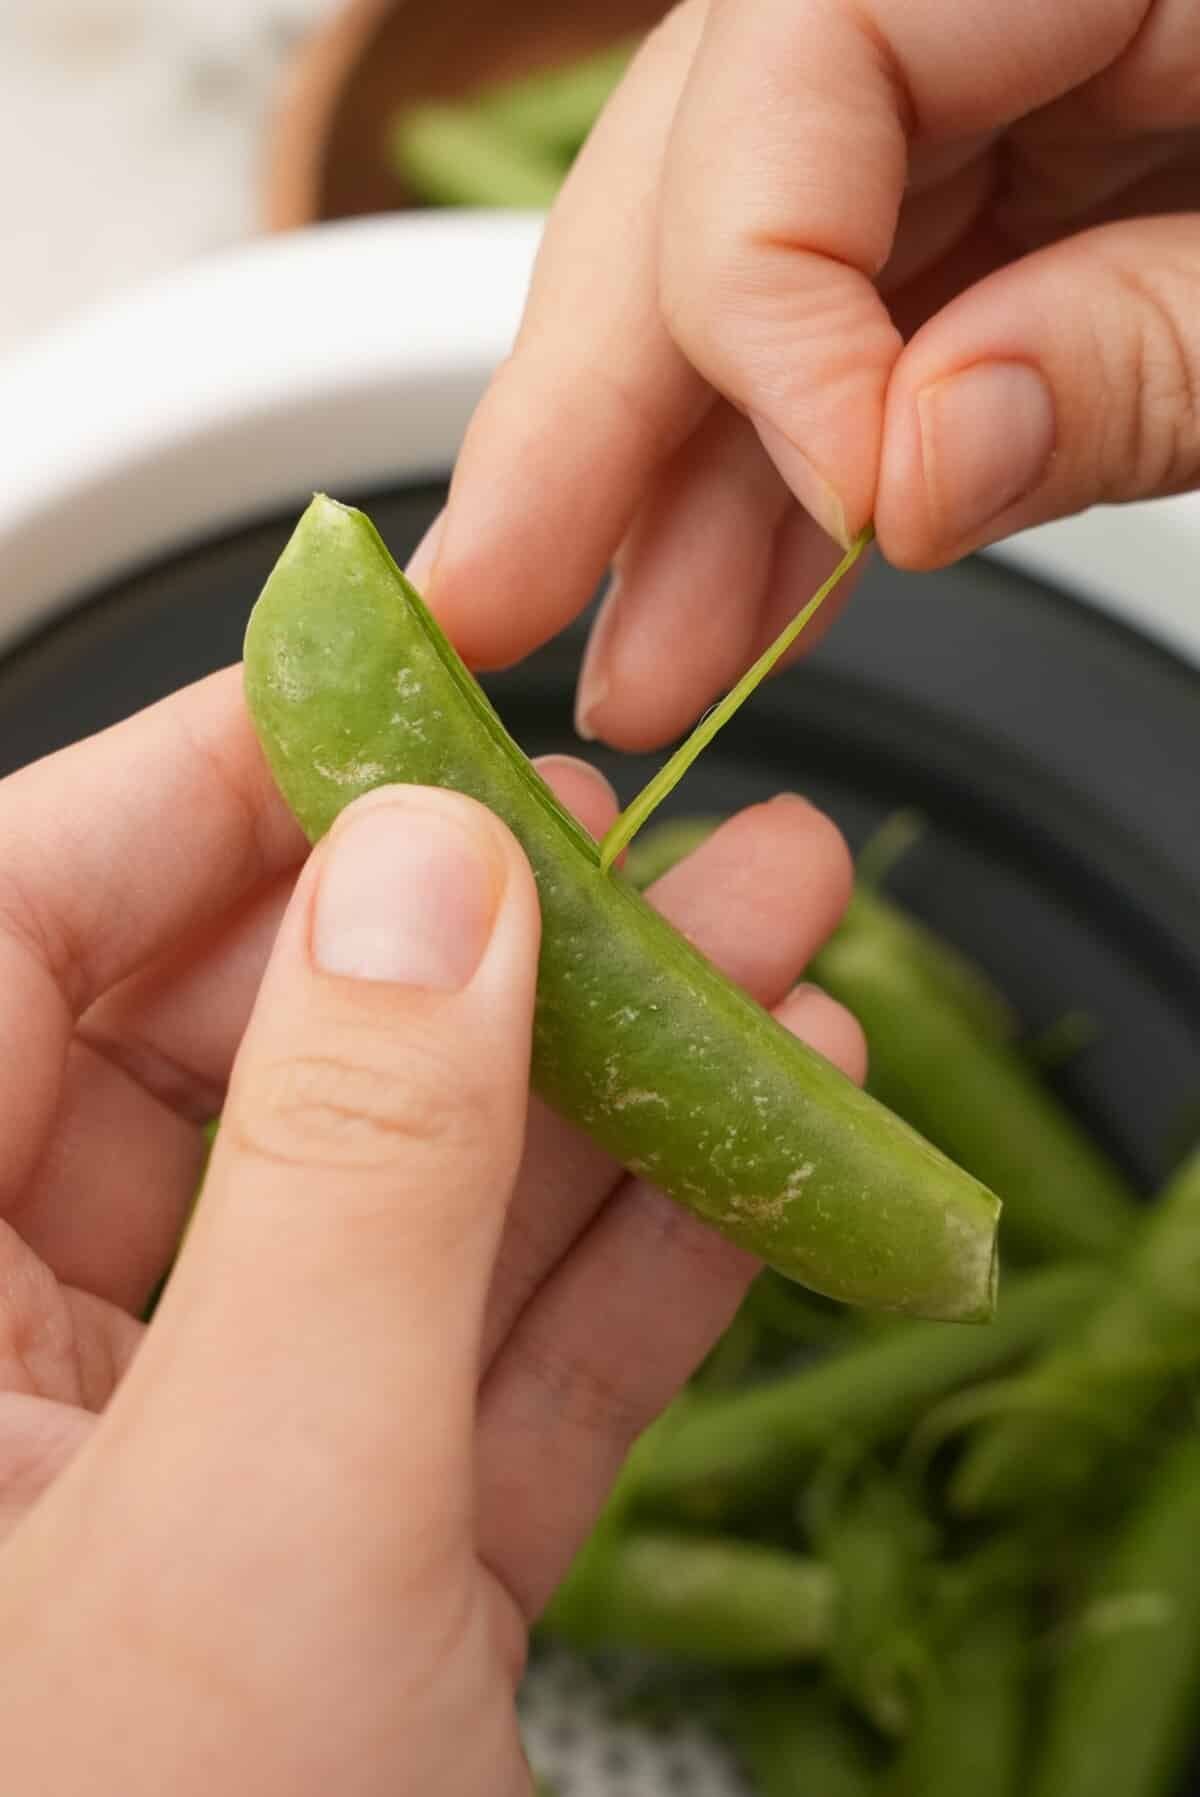 Preparing the snap peas by removing the tough stringy lining.